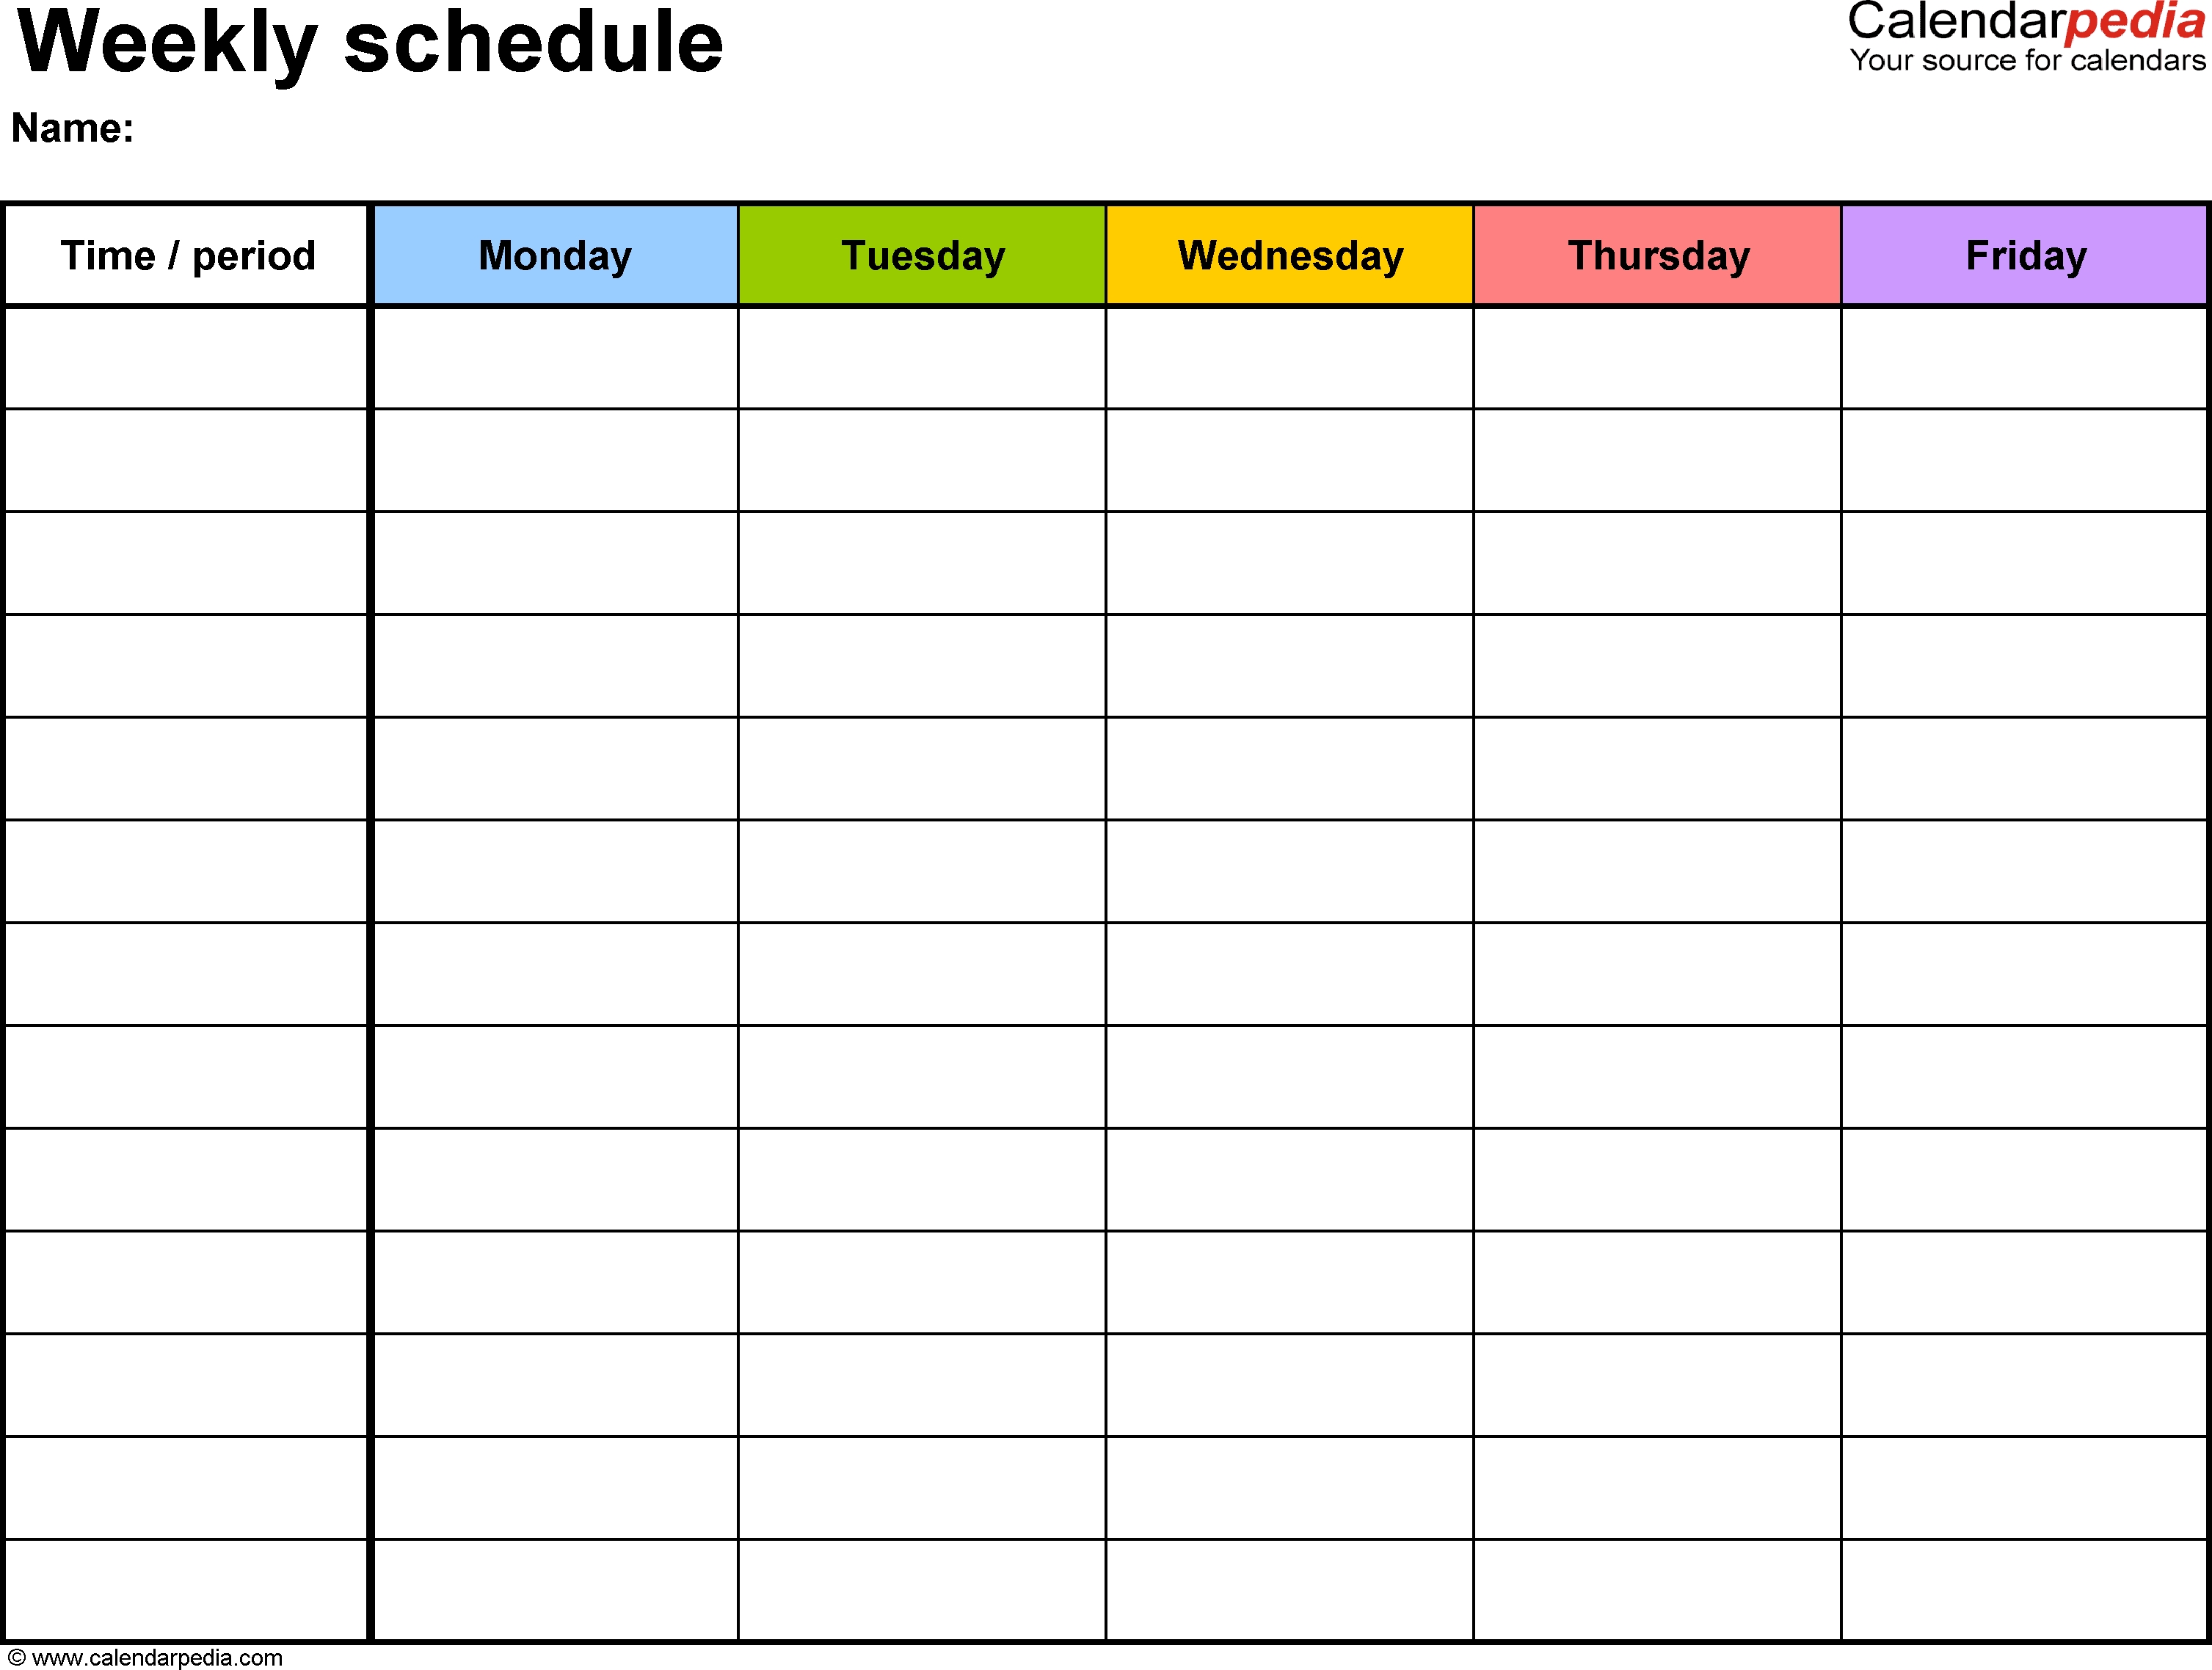 Weekly Schedule Template For Word Version 1: Landscape, 1 Page A Day Calendar Template